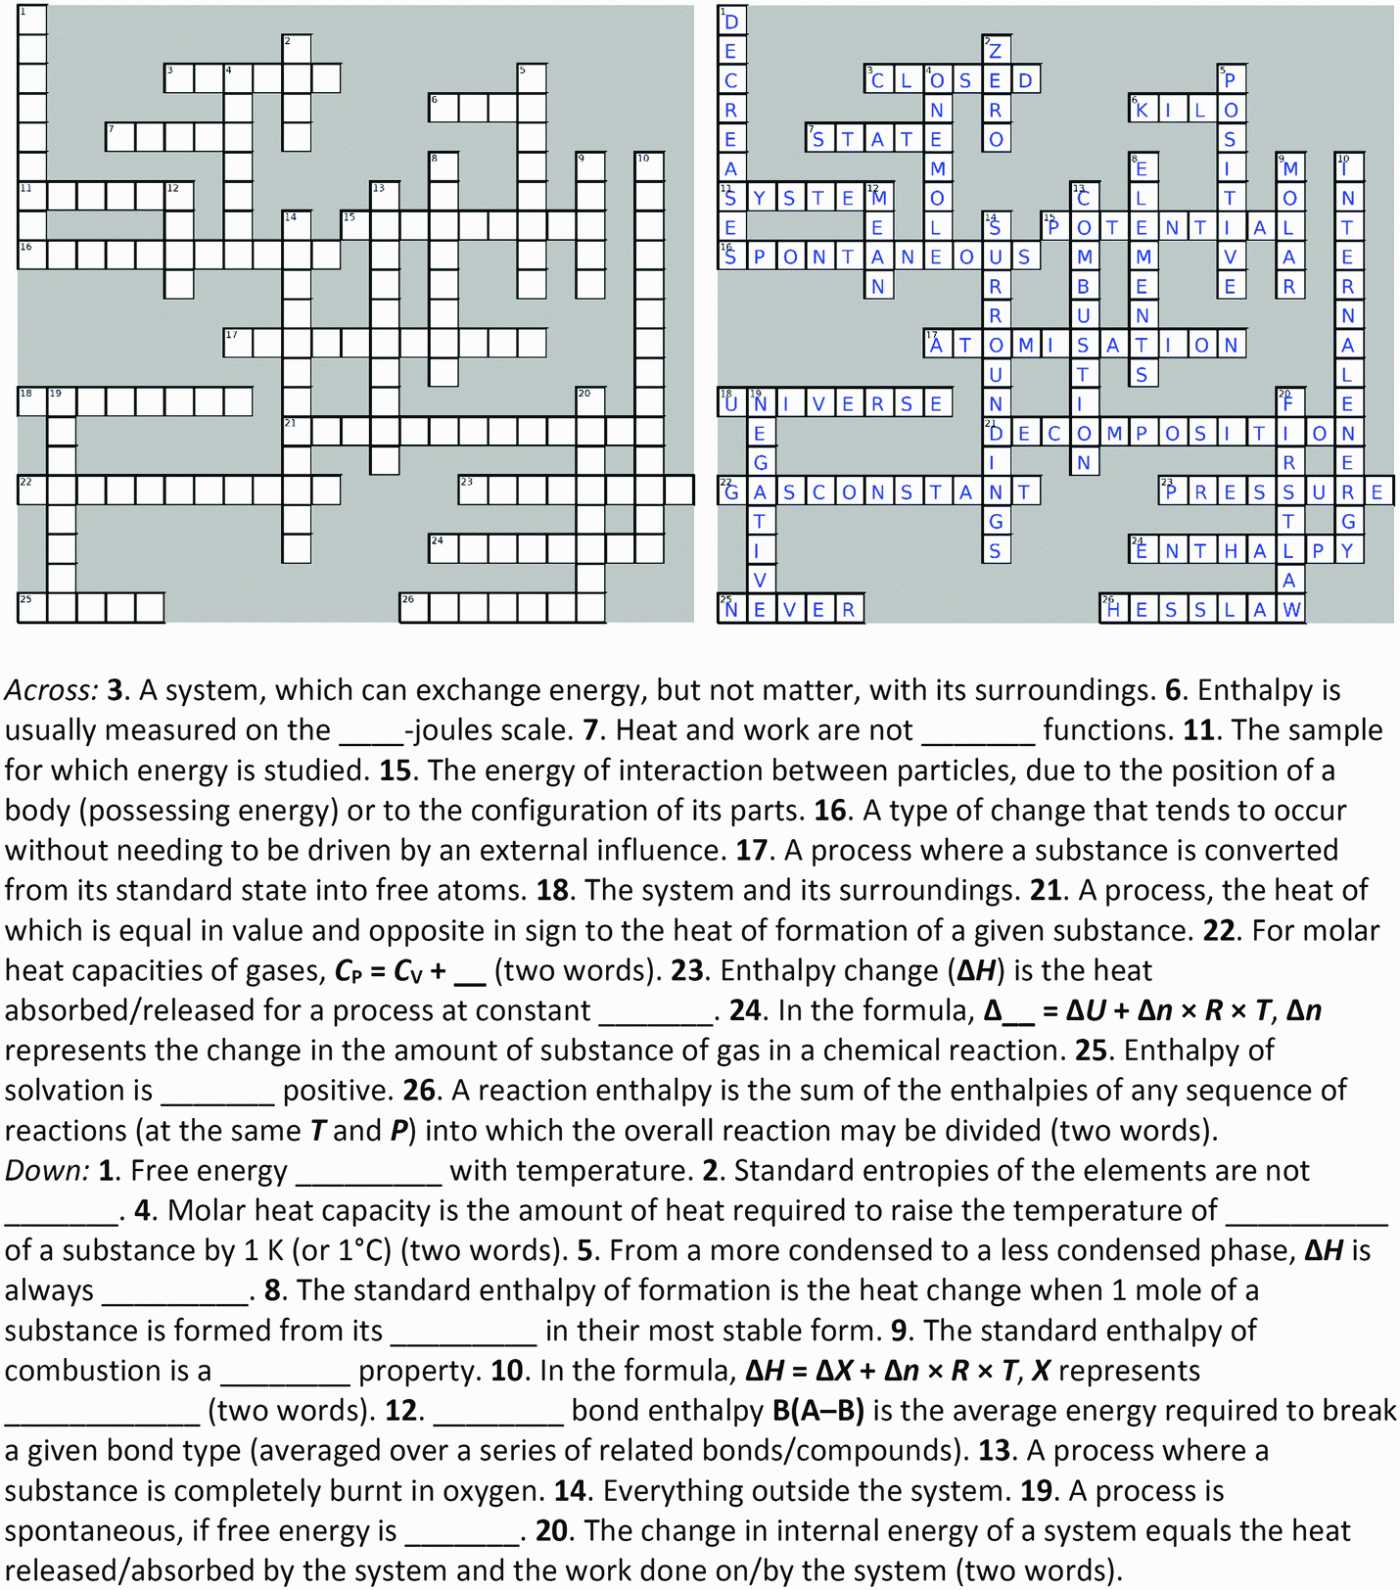 Economic Systems Worksheet Answer Key as Well as Economic Crossword Puzzle Answers Mark Twain Media